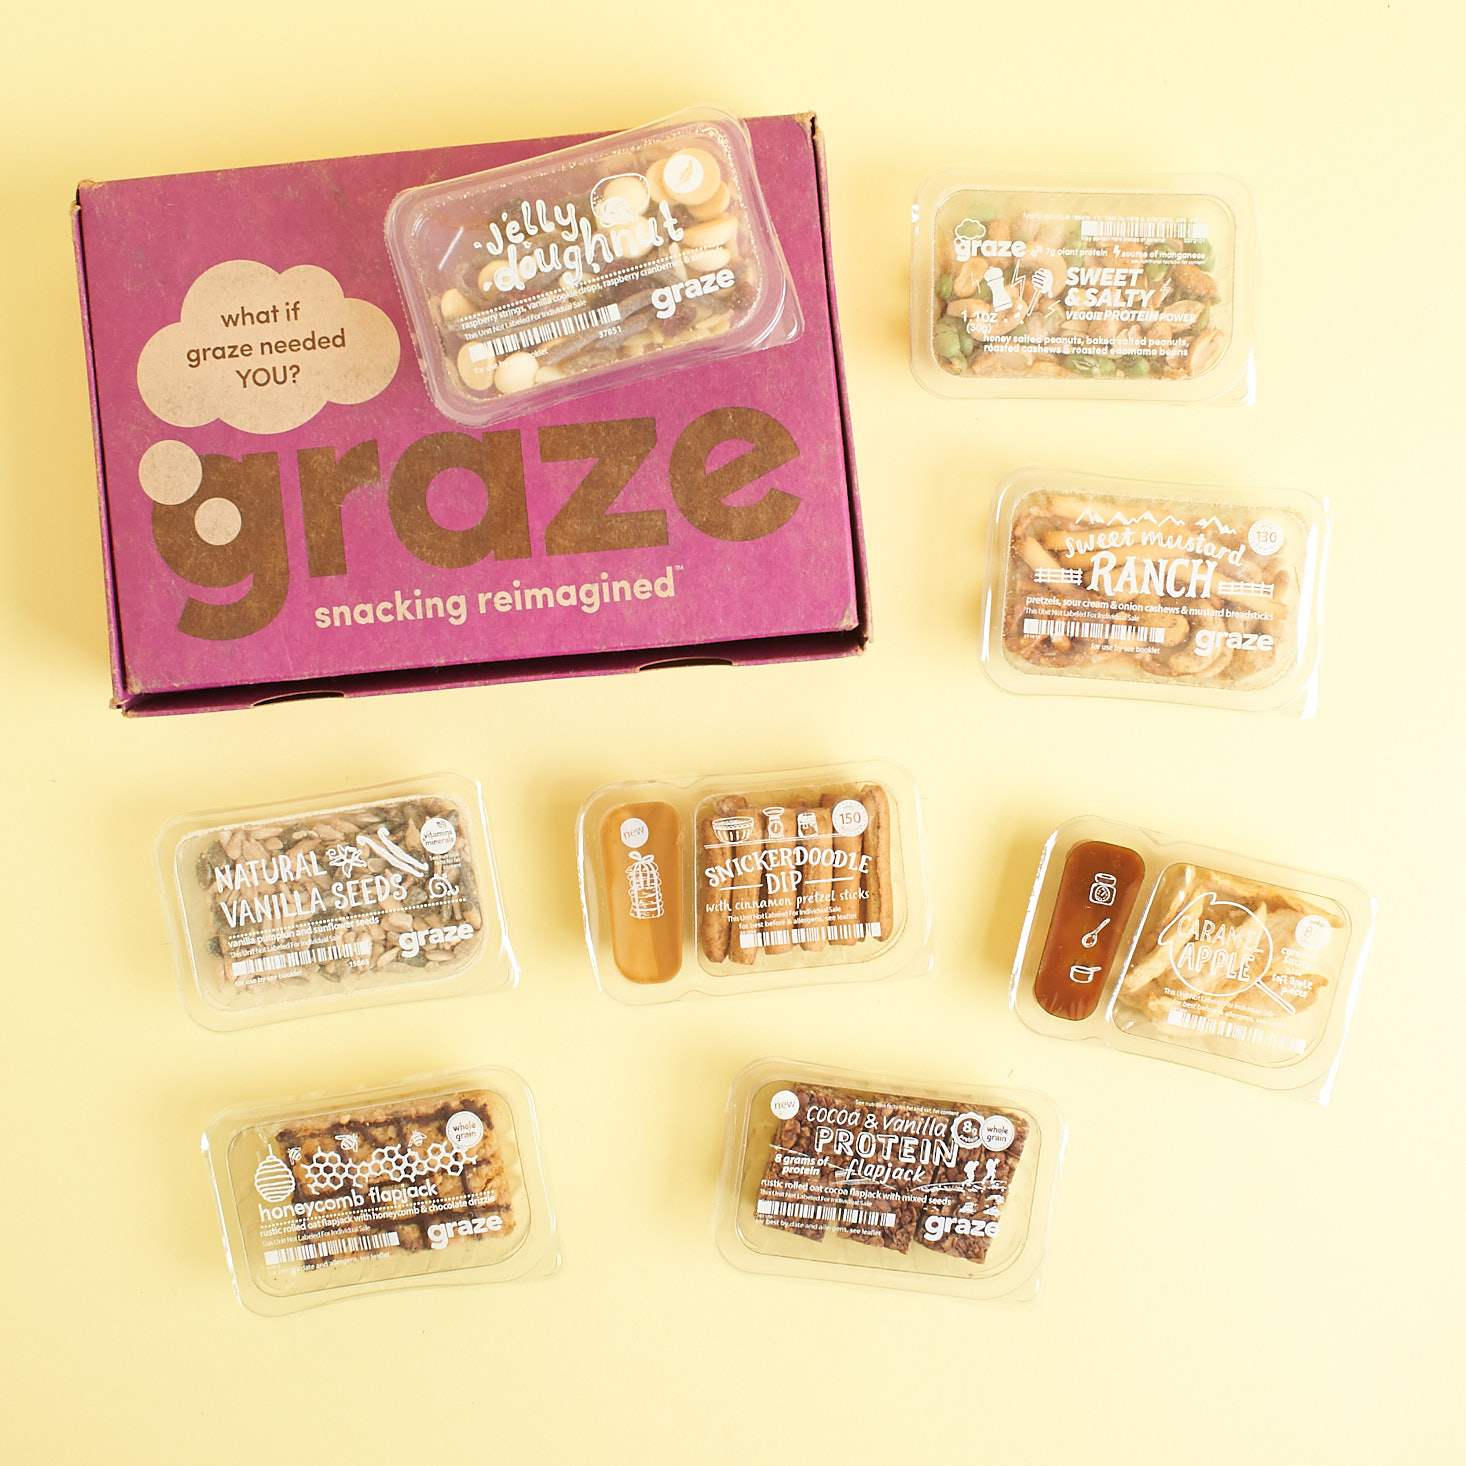 Graze 8 Snack Variety Box Review 2 Free Box Coupon March 2019 Msa